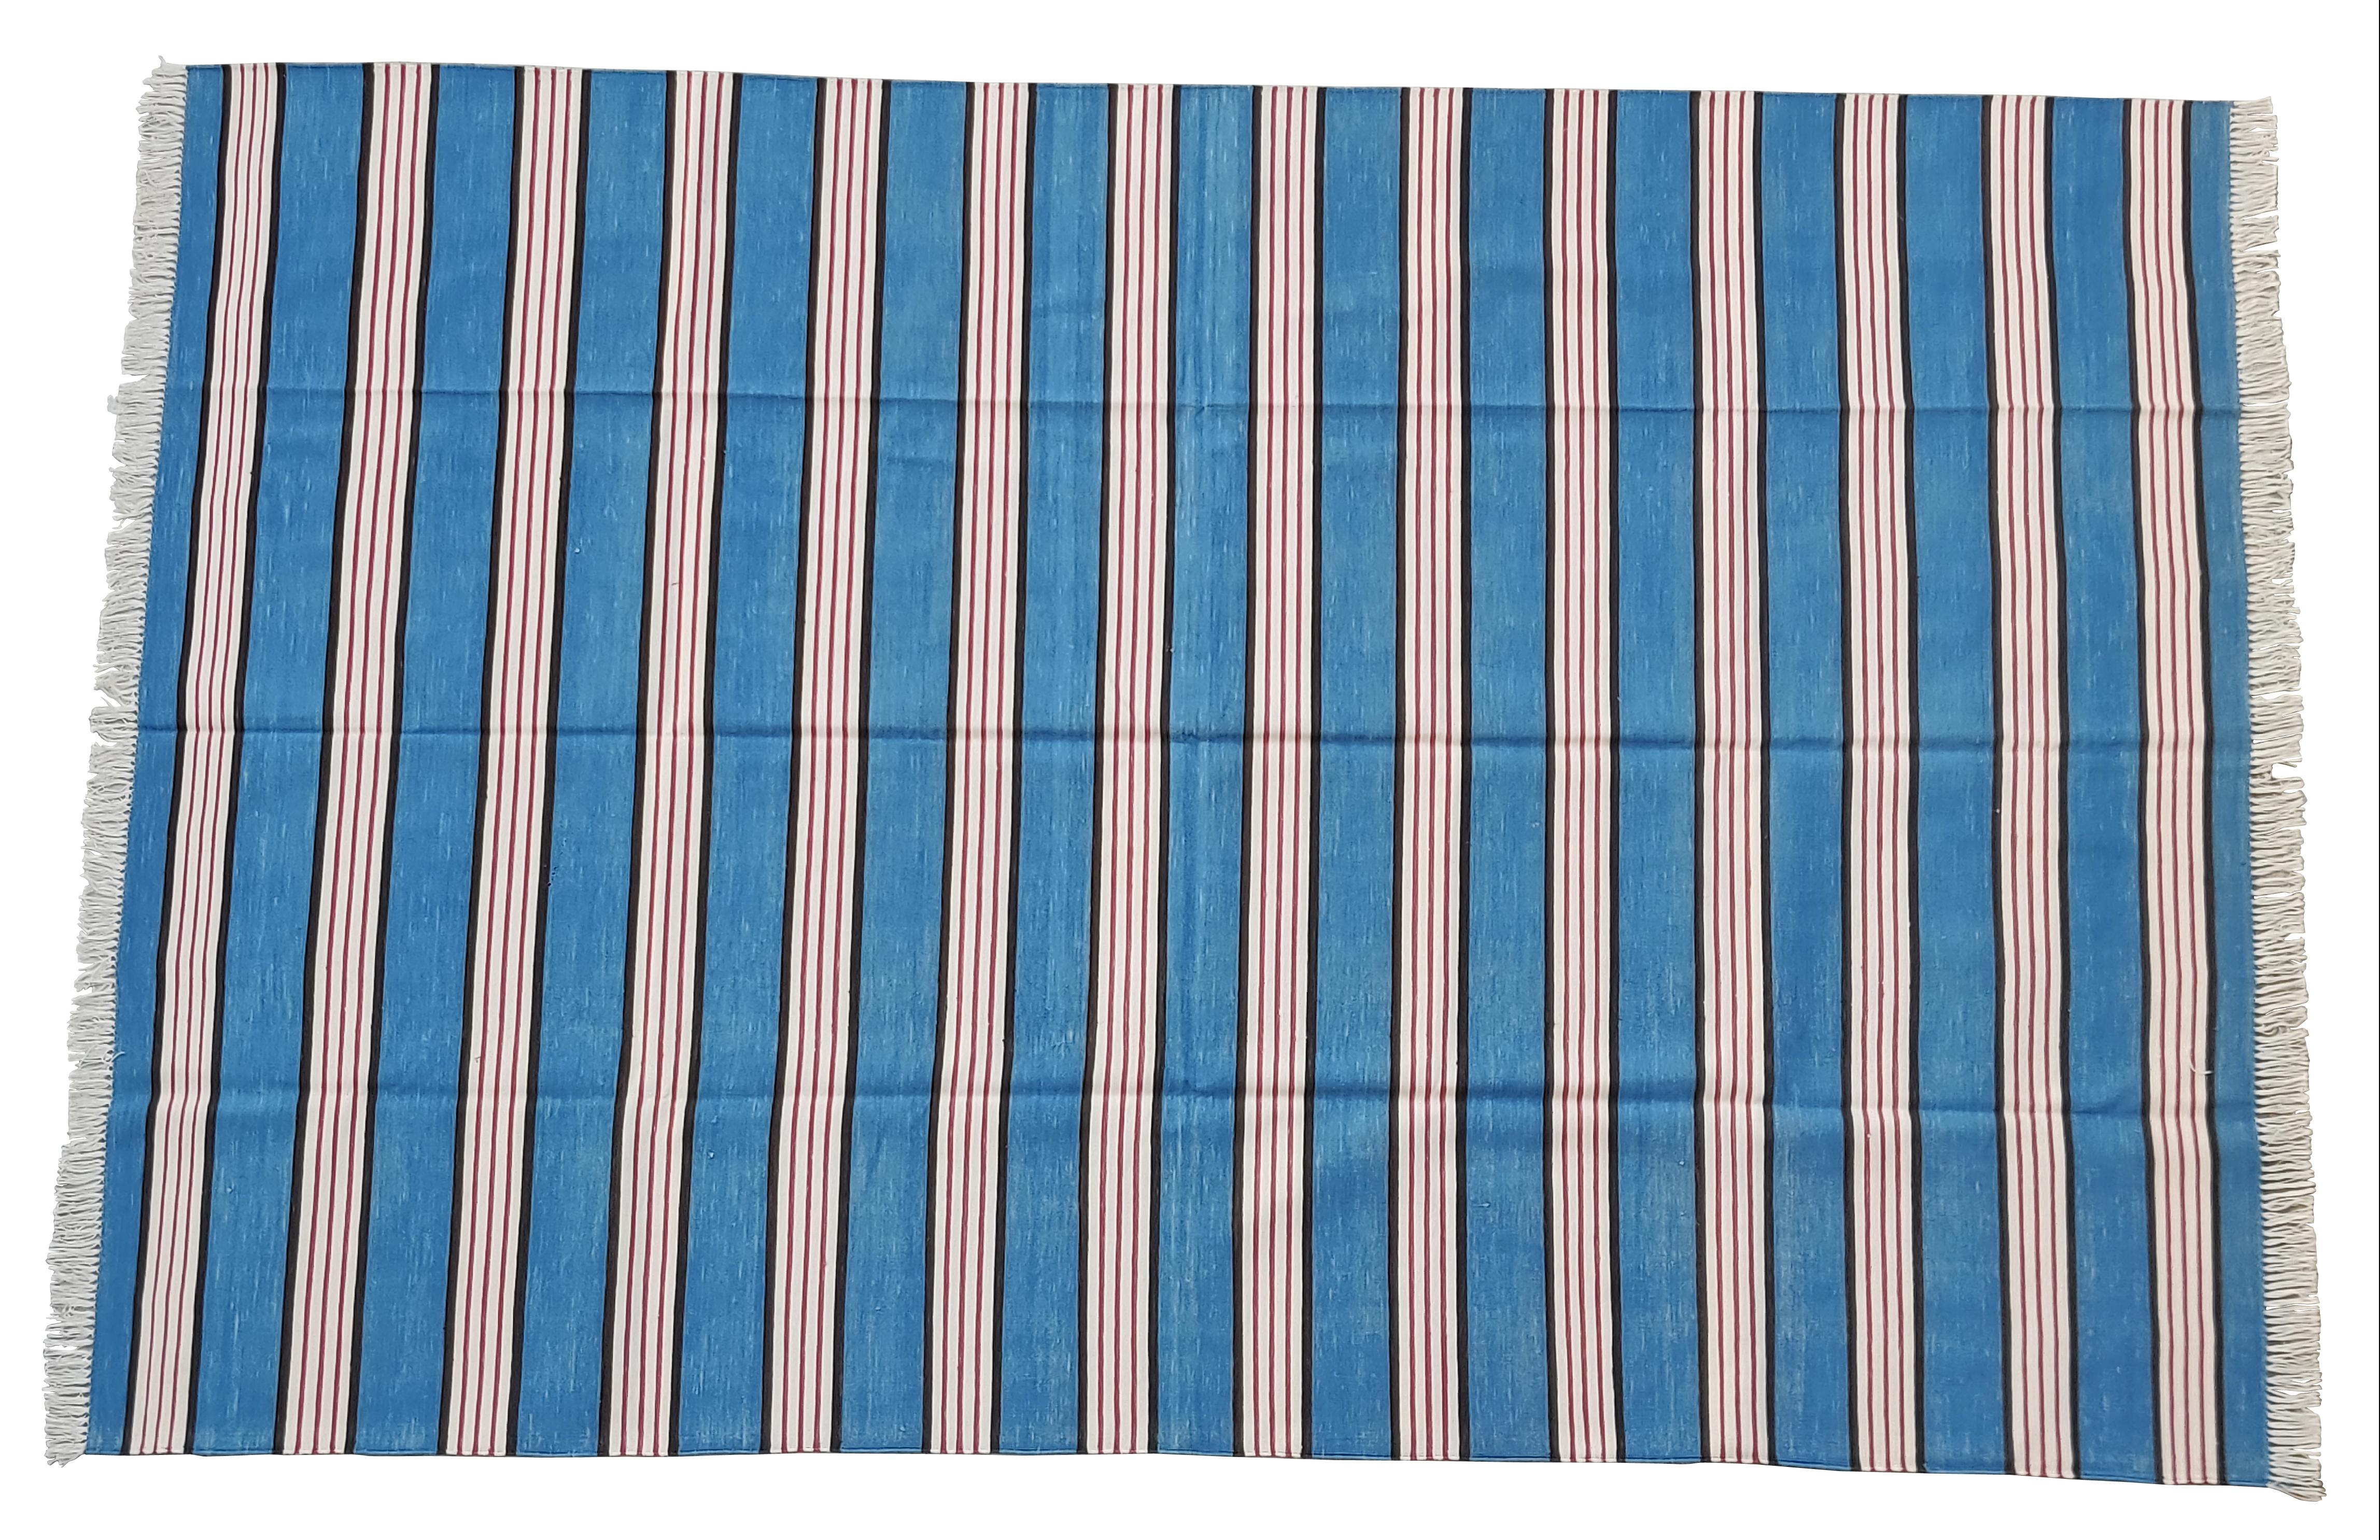 Contemporary Handmade Cotton Area Flat Weave Rug, 6x9 Blue And Pink Striped Indian Dhurrie For Sale